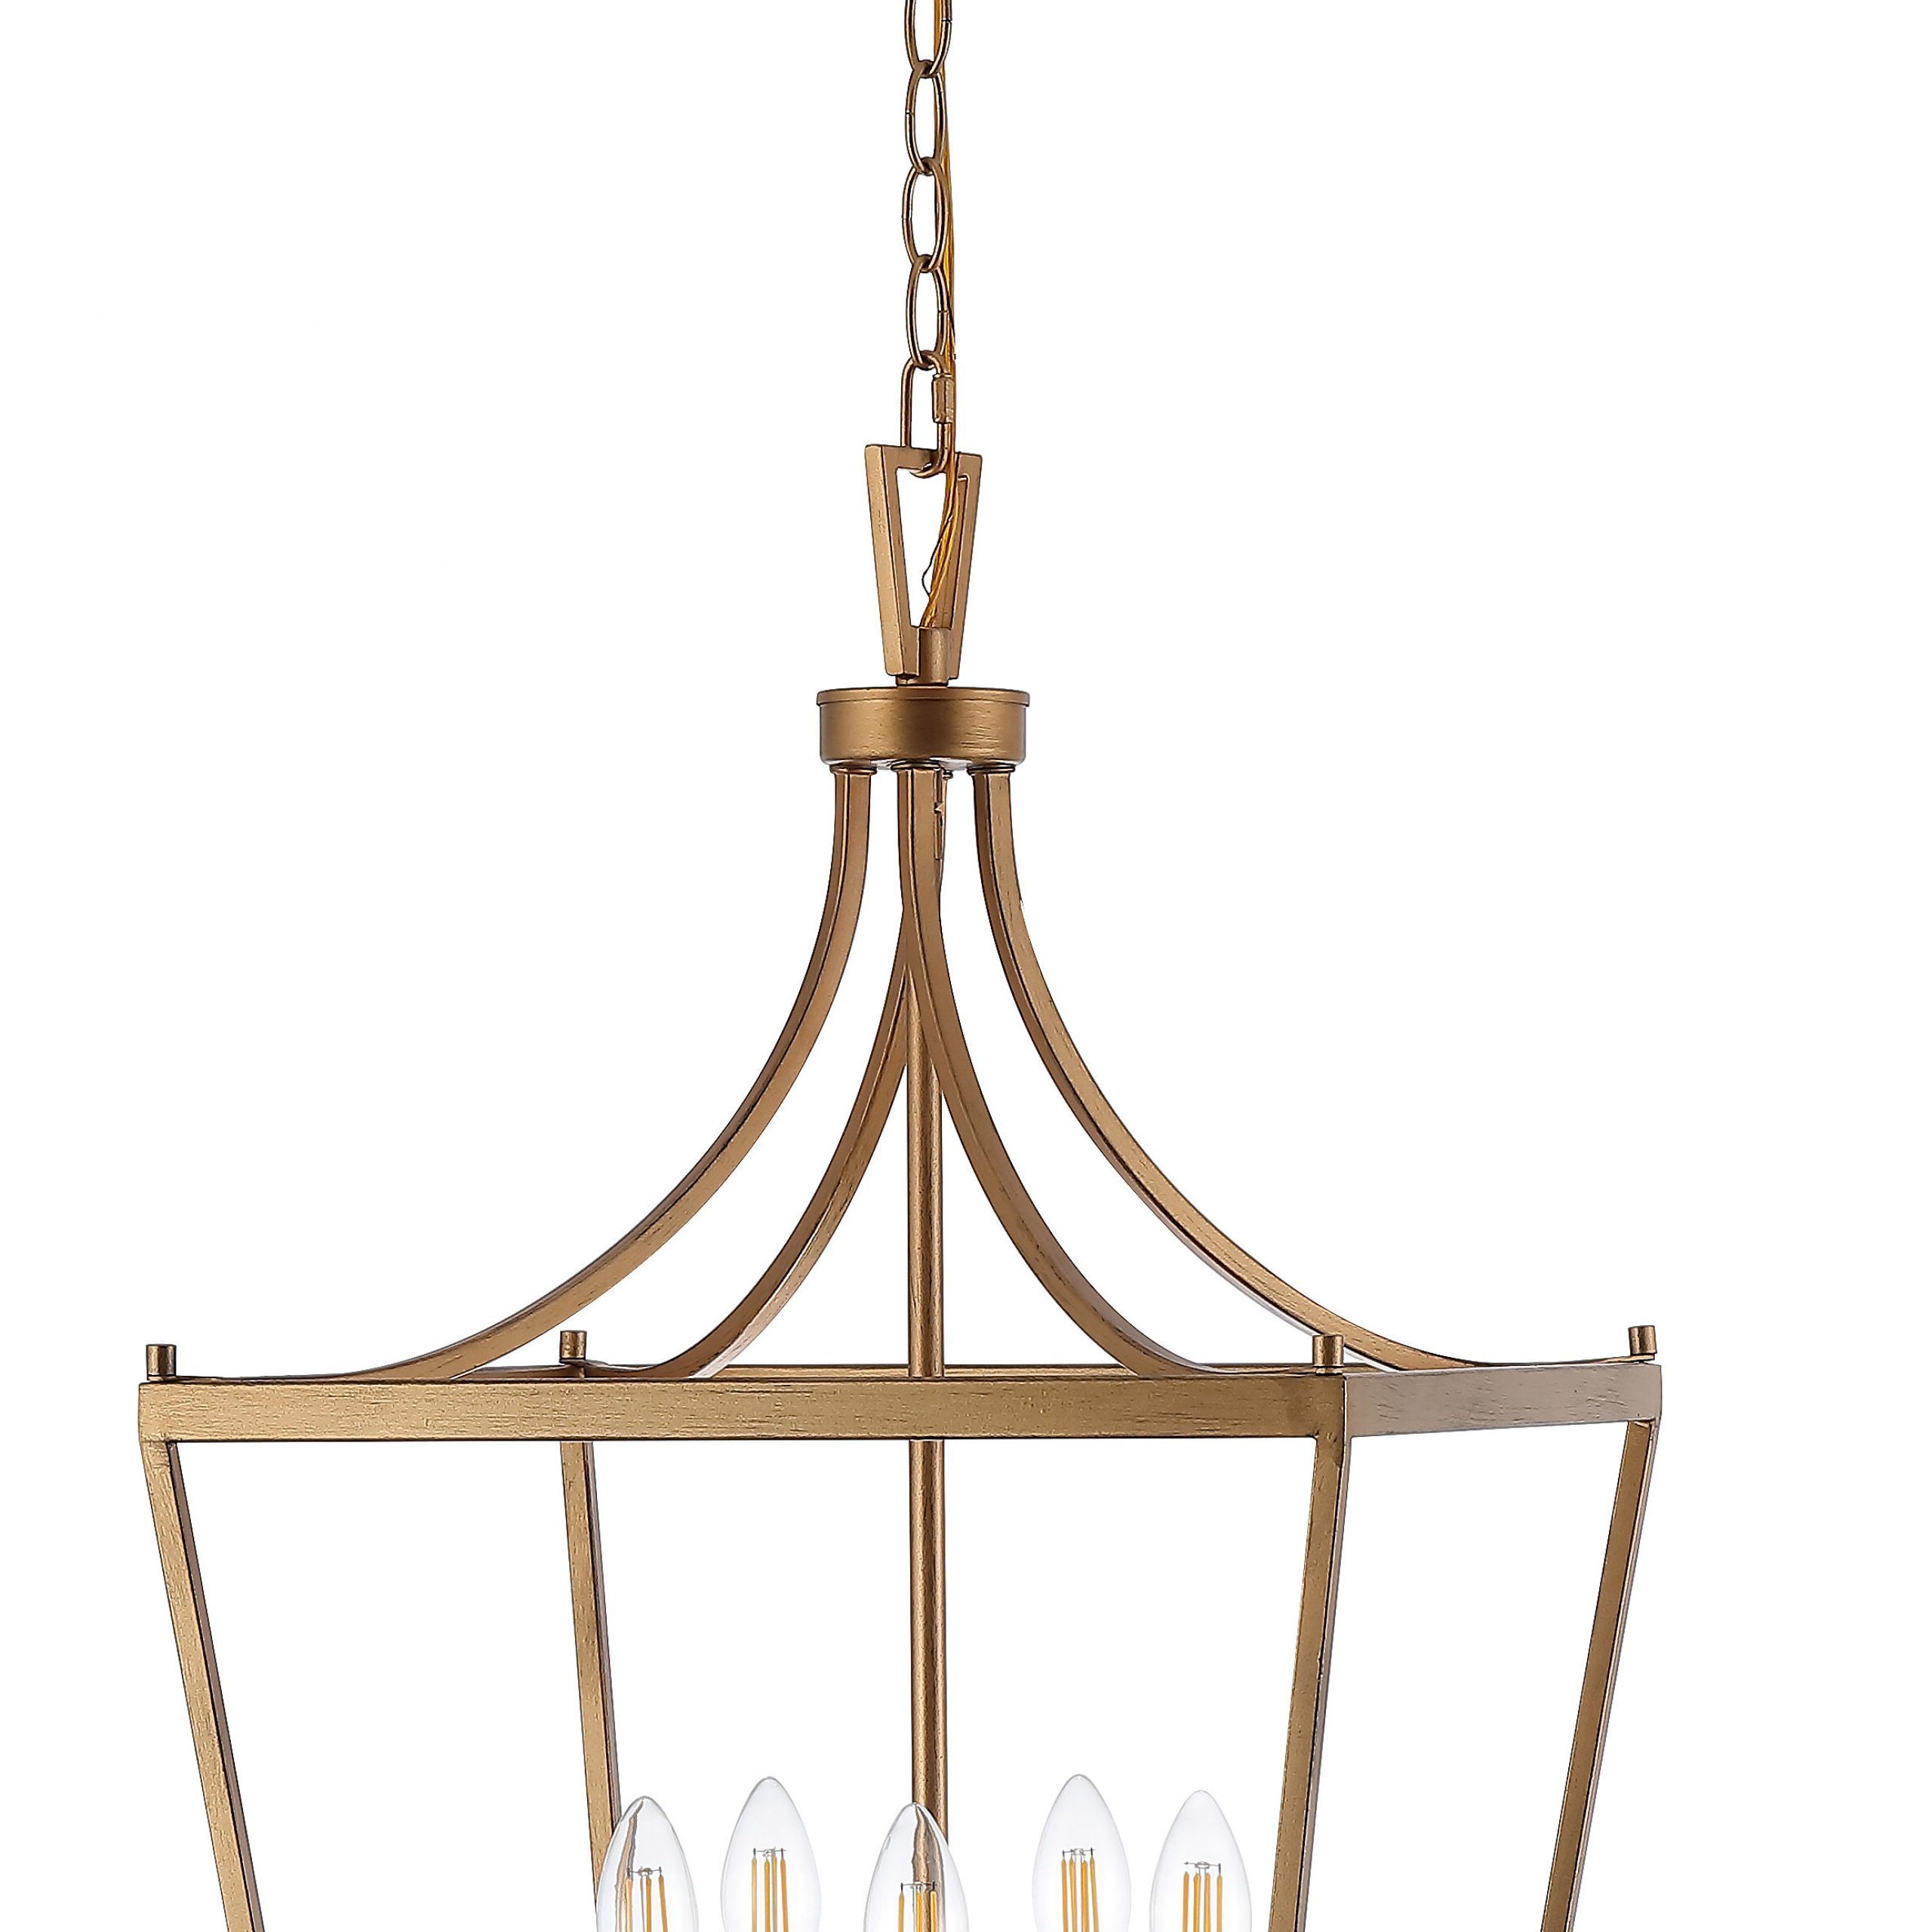 Gild One Light Lantern Chandeliers For Widely Used Ivy Bronx Naranjo 5 – Light Lantern Geometric Chandelier & Reviews (View 8 of 15)